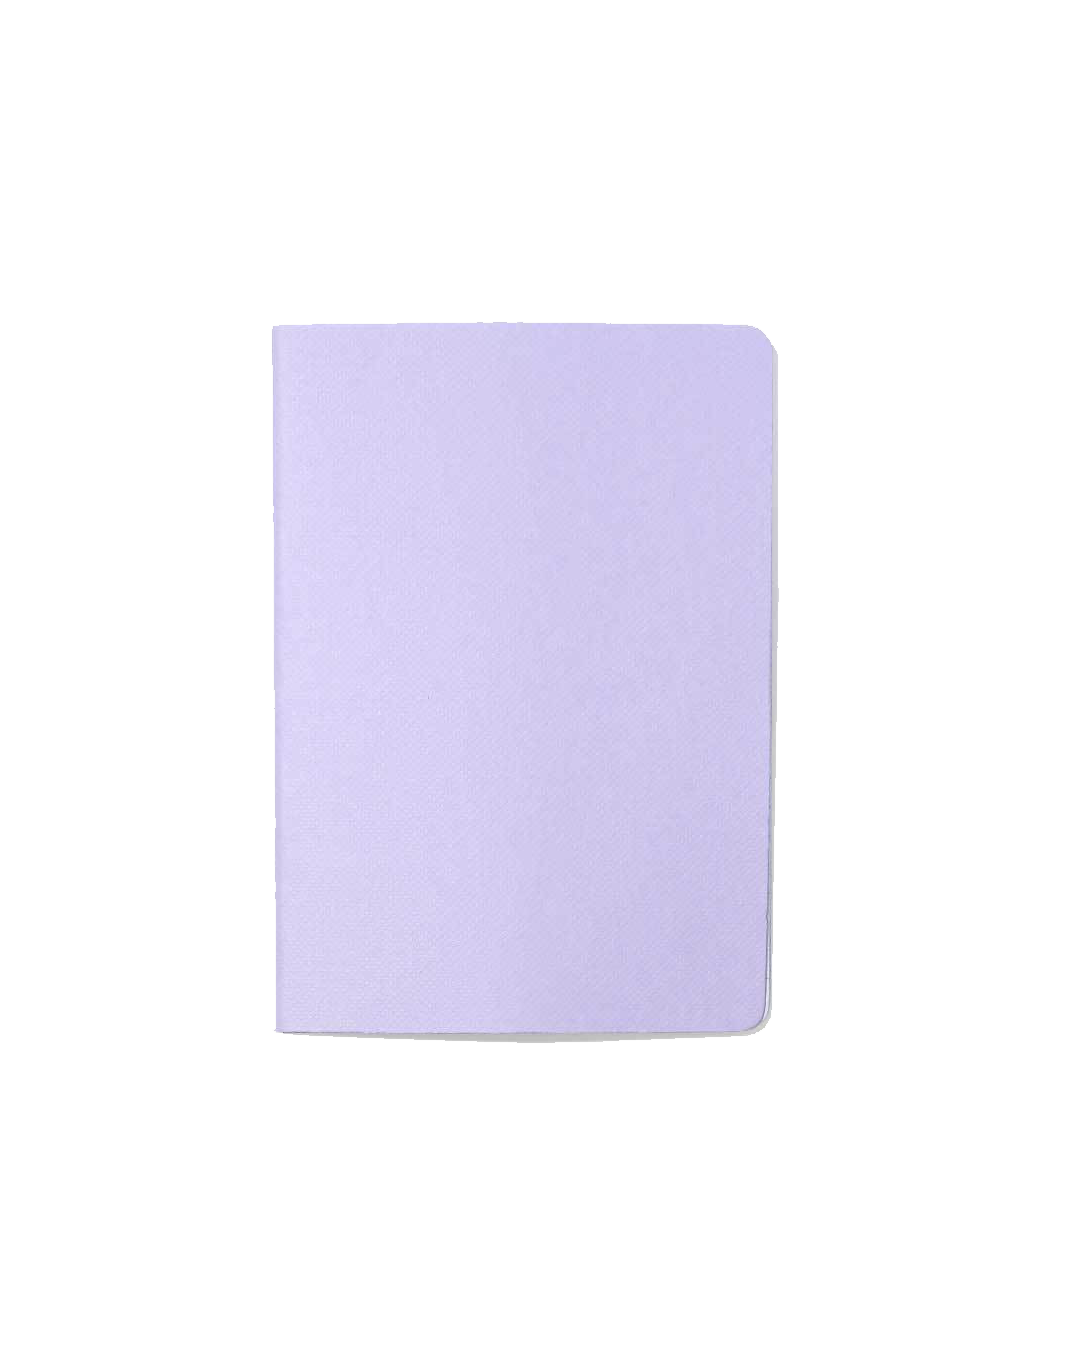 Notebook_Paper_a6-11.png